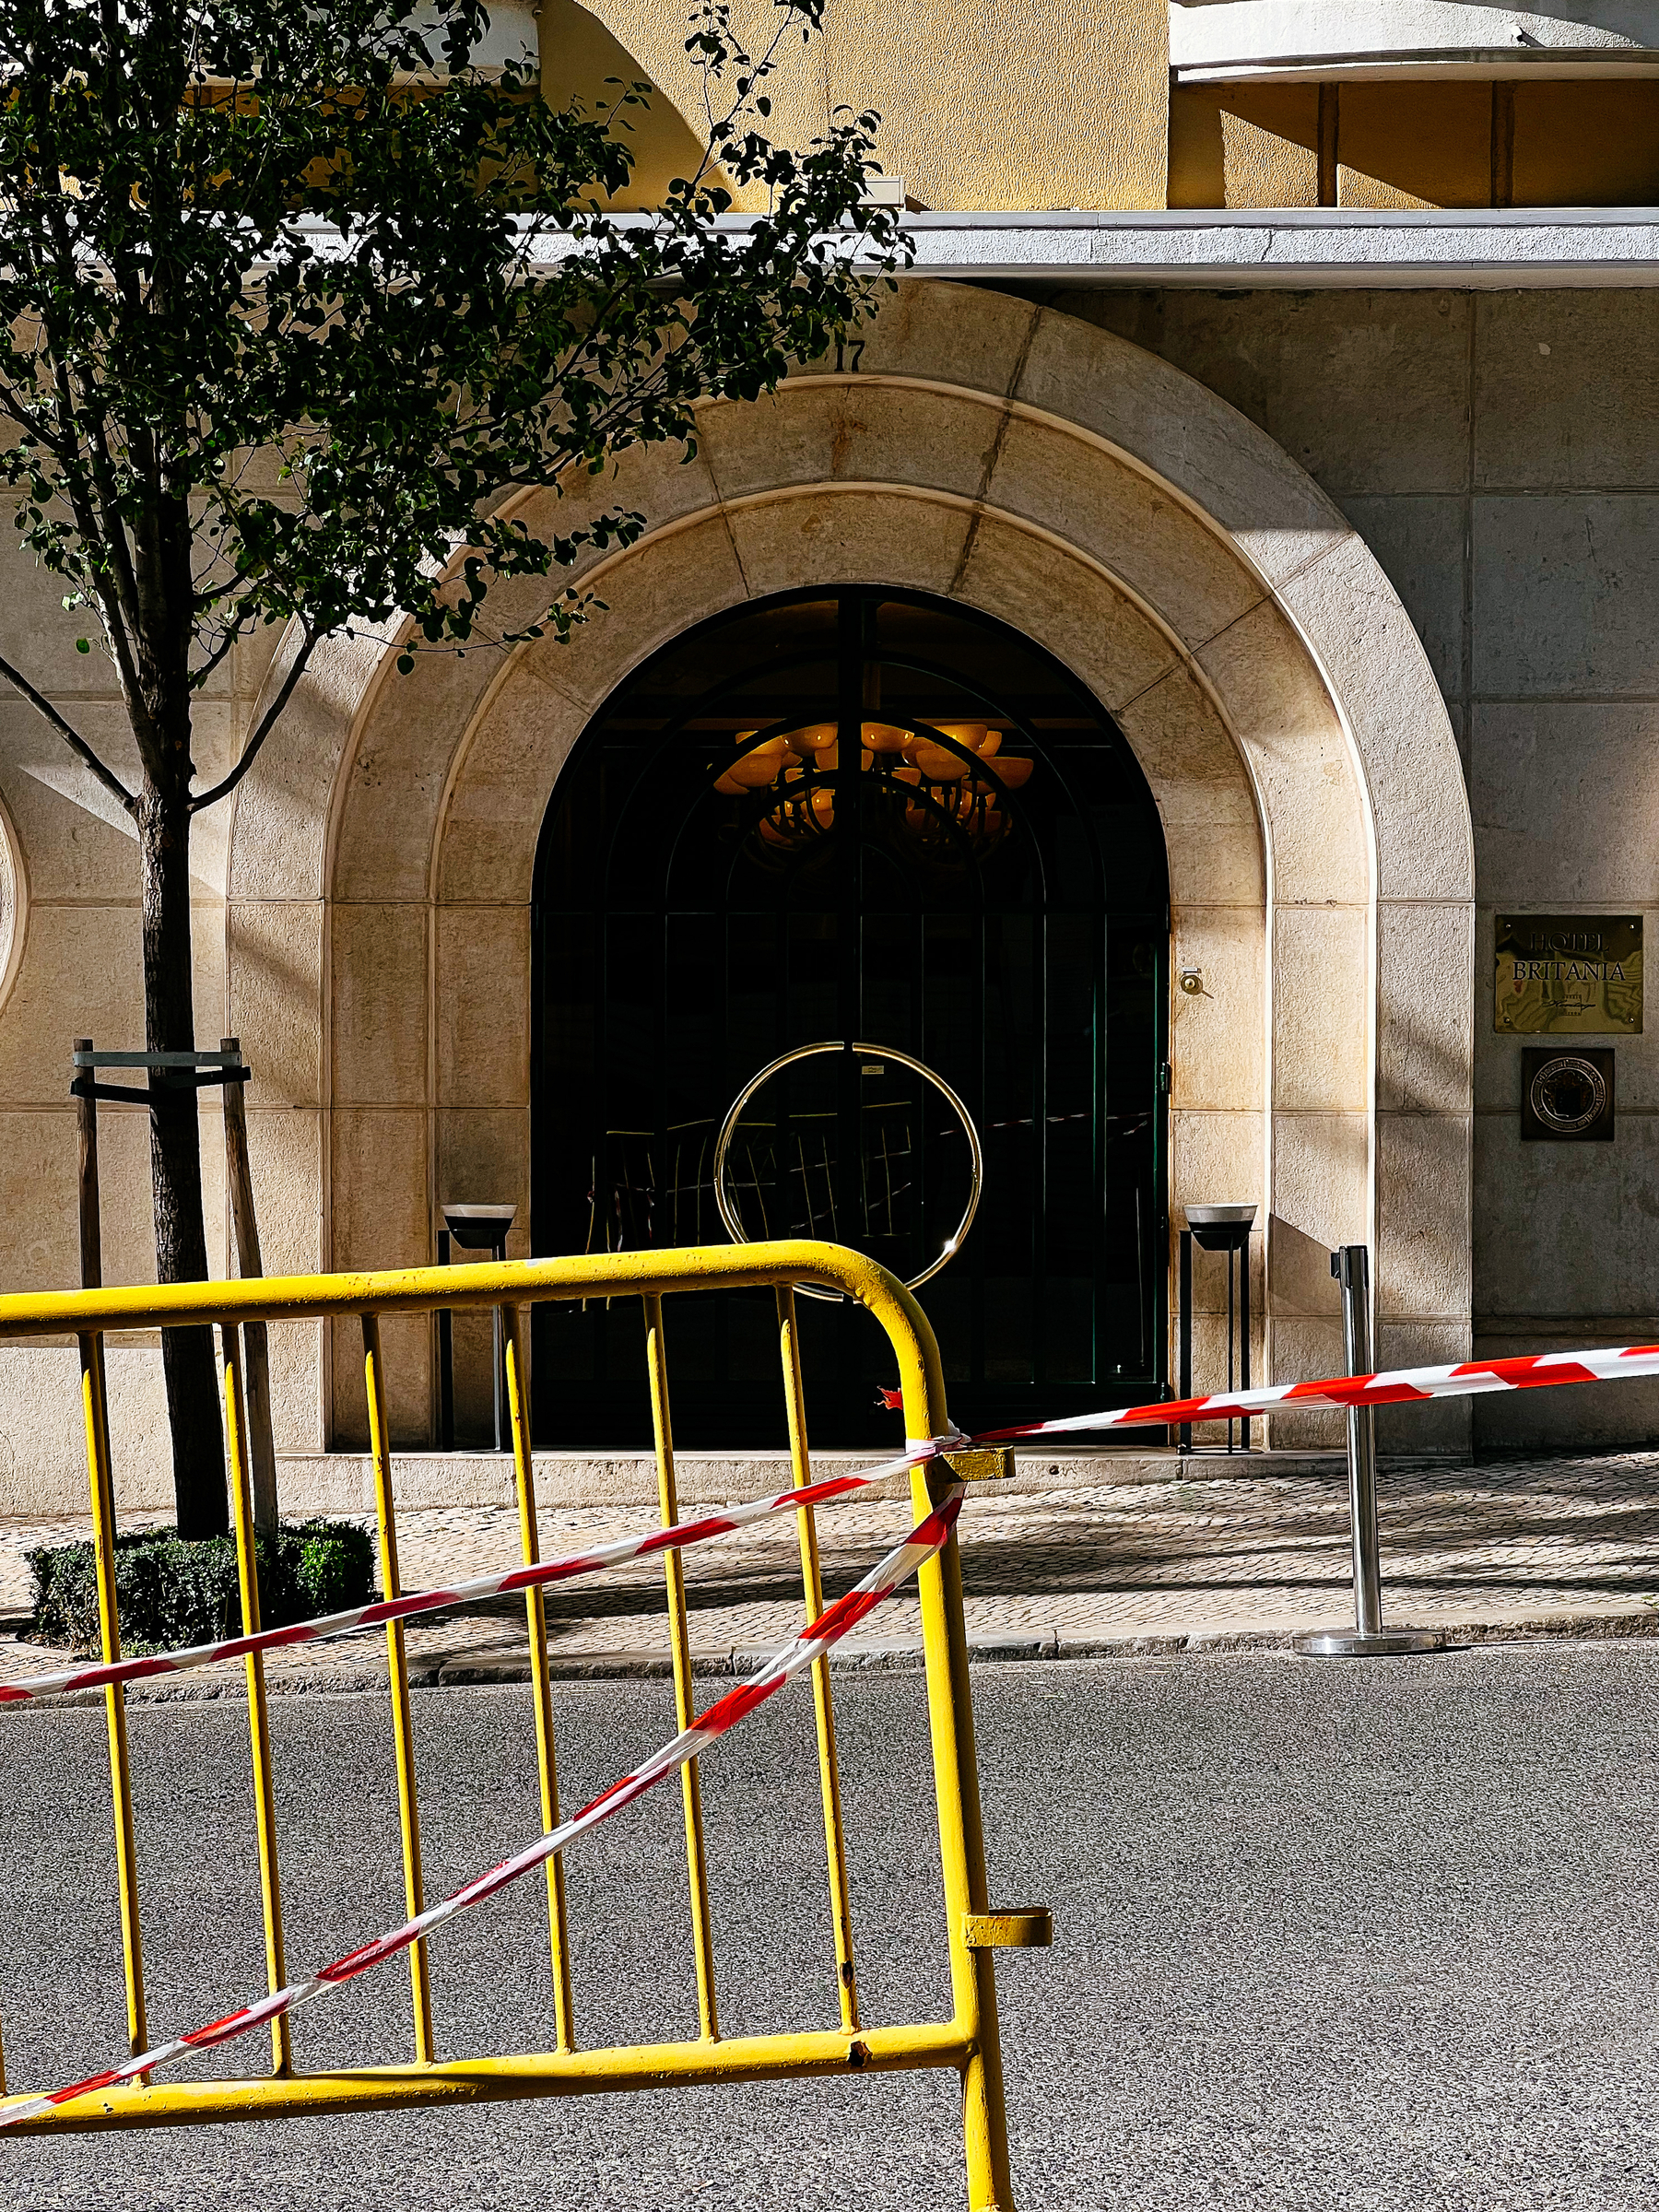 Entrance to a building, with an arch. On the foreground, a yellow fence